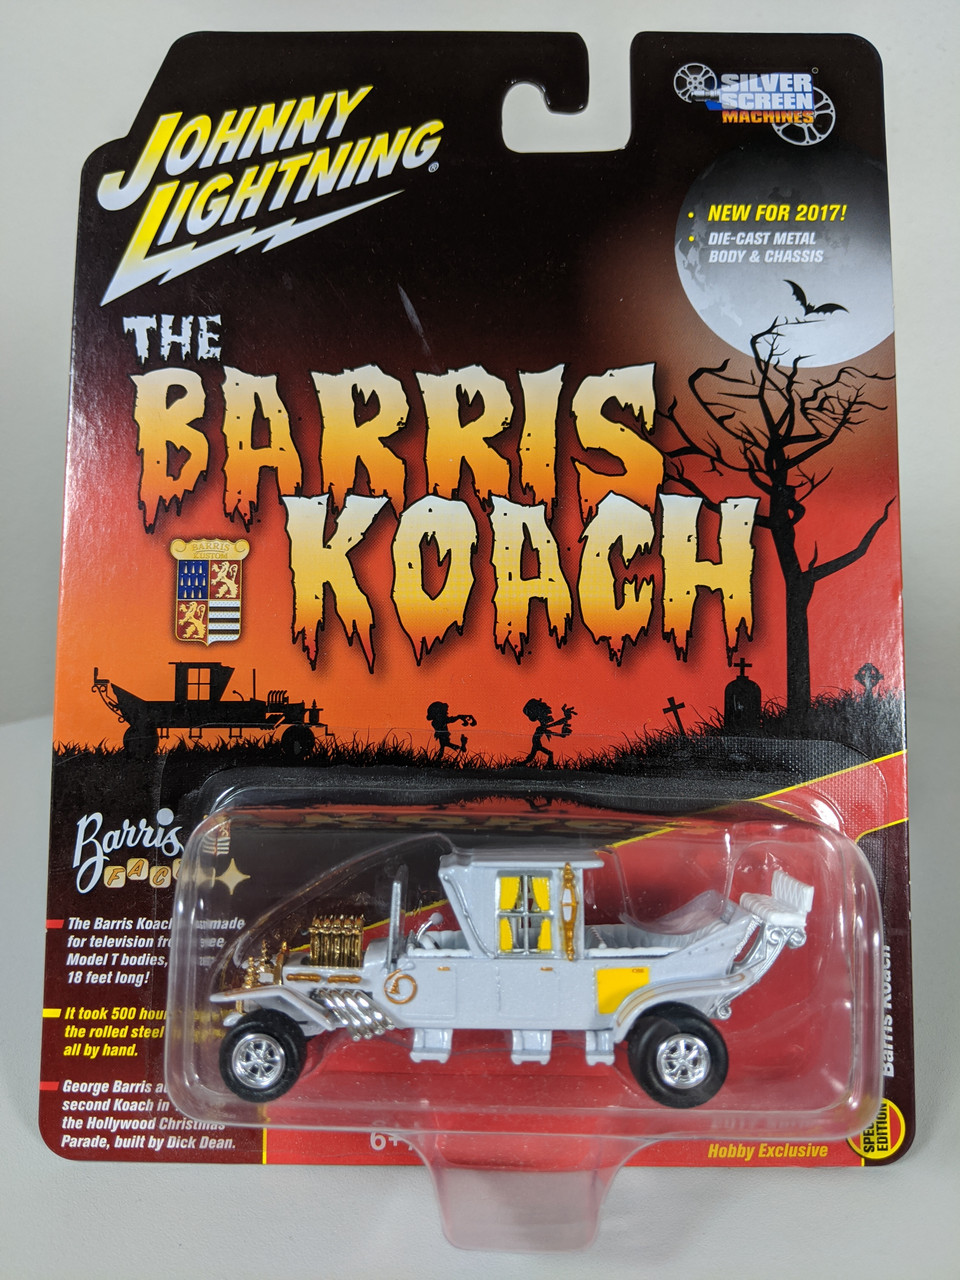 1:64 The Barris Koach White Lightning Hobby Exclusive by Johnny